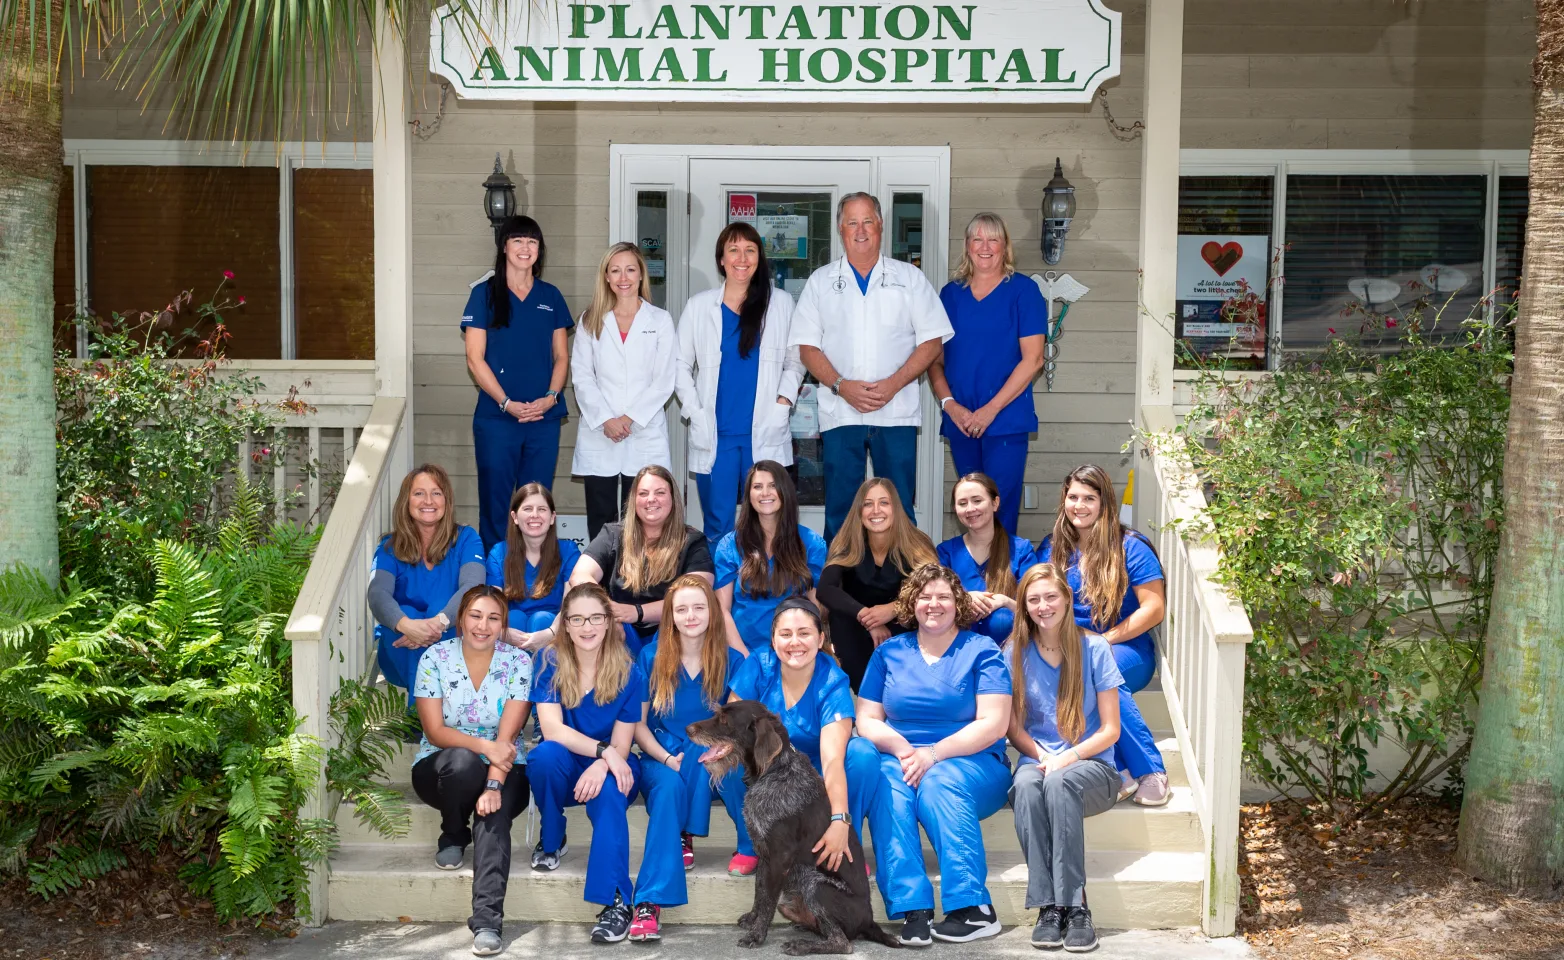 Plantation Animal Hospital group staff photo standing and sitting together in front of their building.